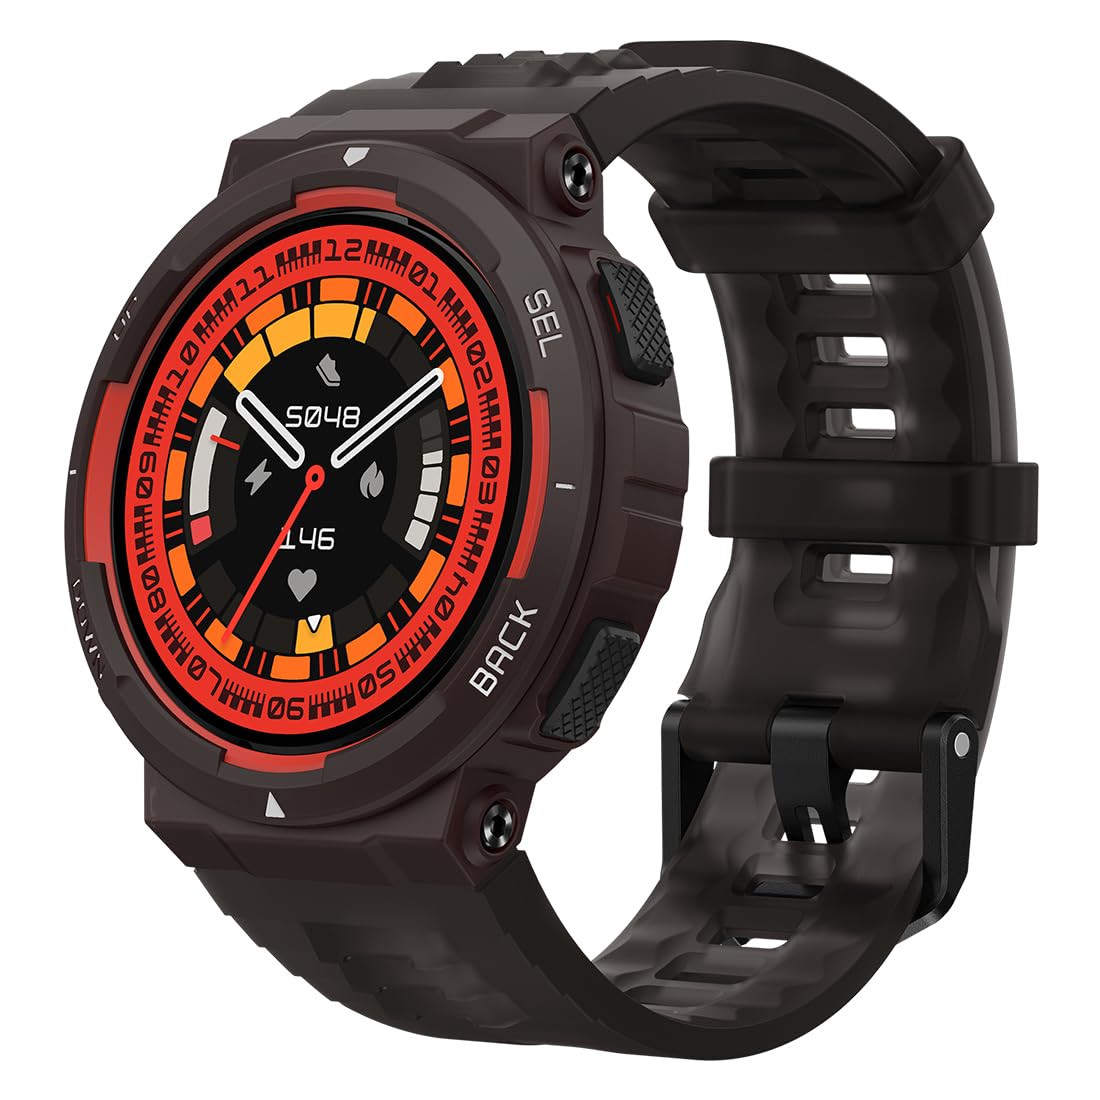 Amazfit Active Edge Rugged Smart Watch Launched in India ( 10 ATM, GPS, 16 days battery life)